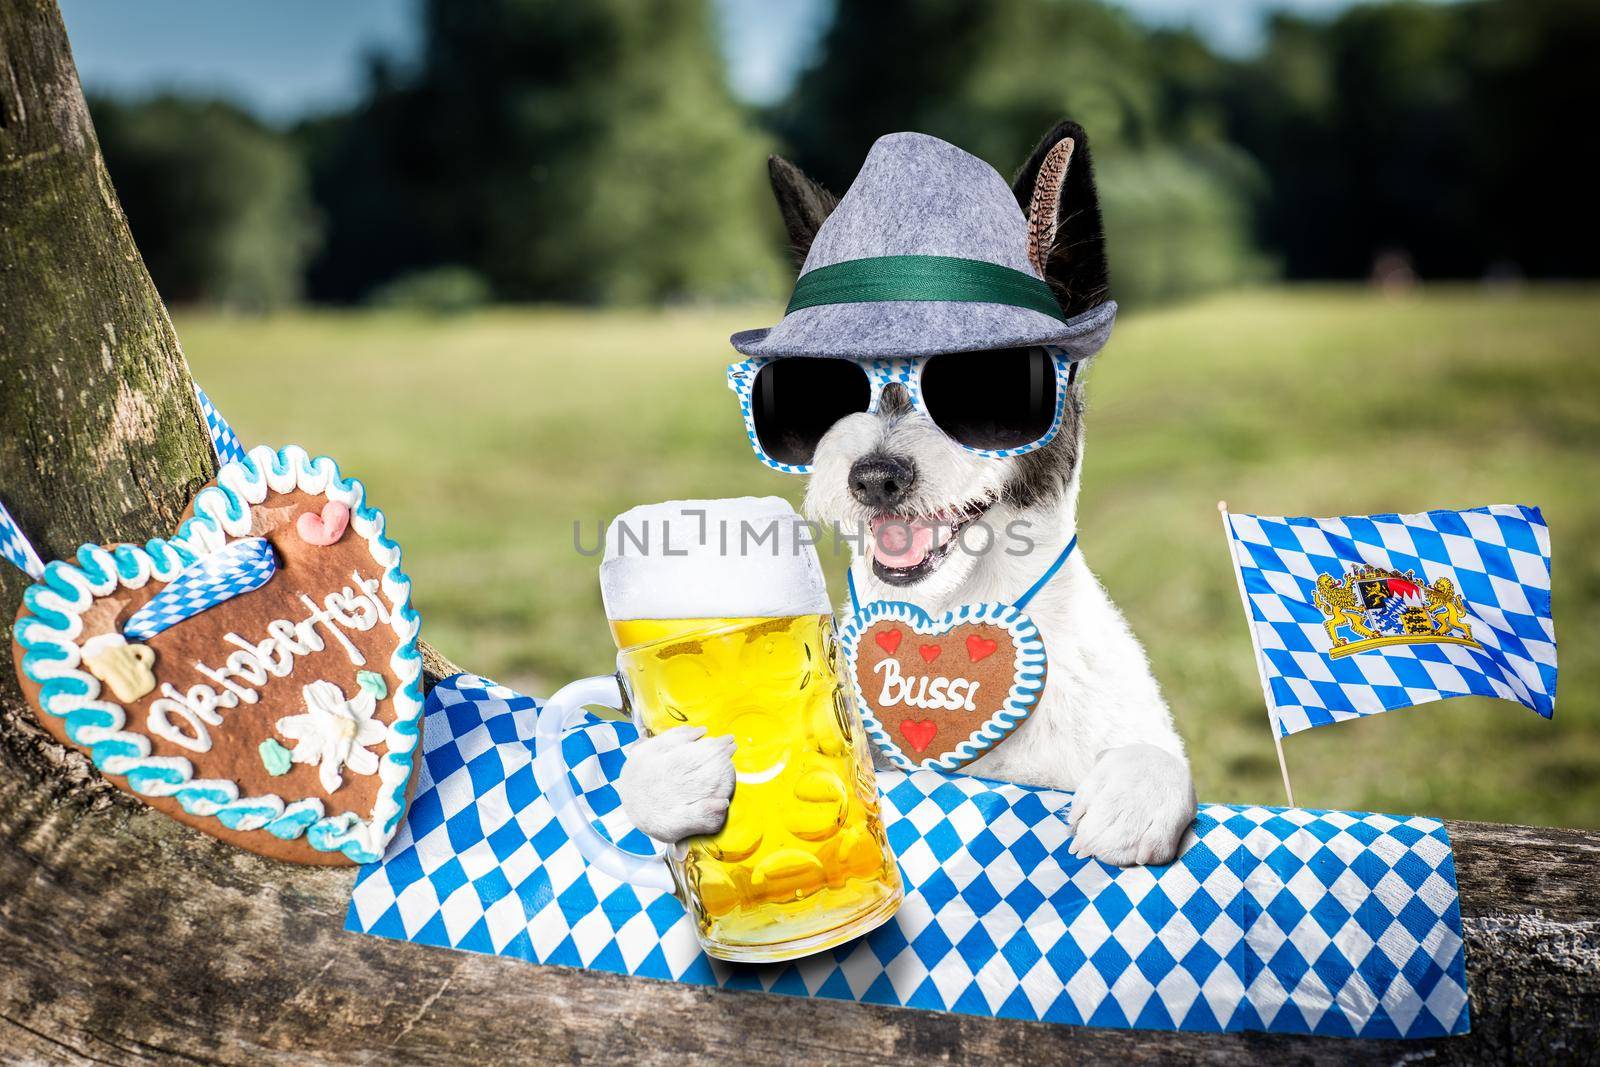 bavarian poodle  dog  holding  a beer mug  outdoors by the river and mountains  , ready for the beer party celebration festival in munich